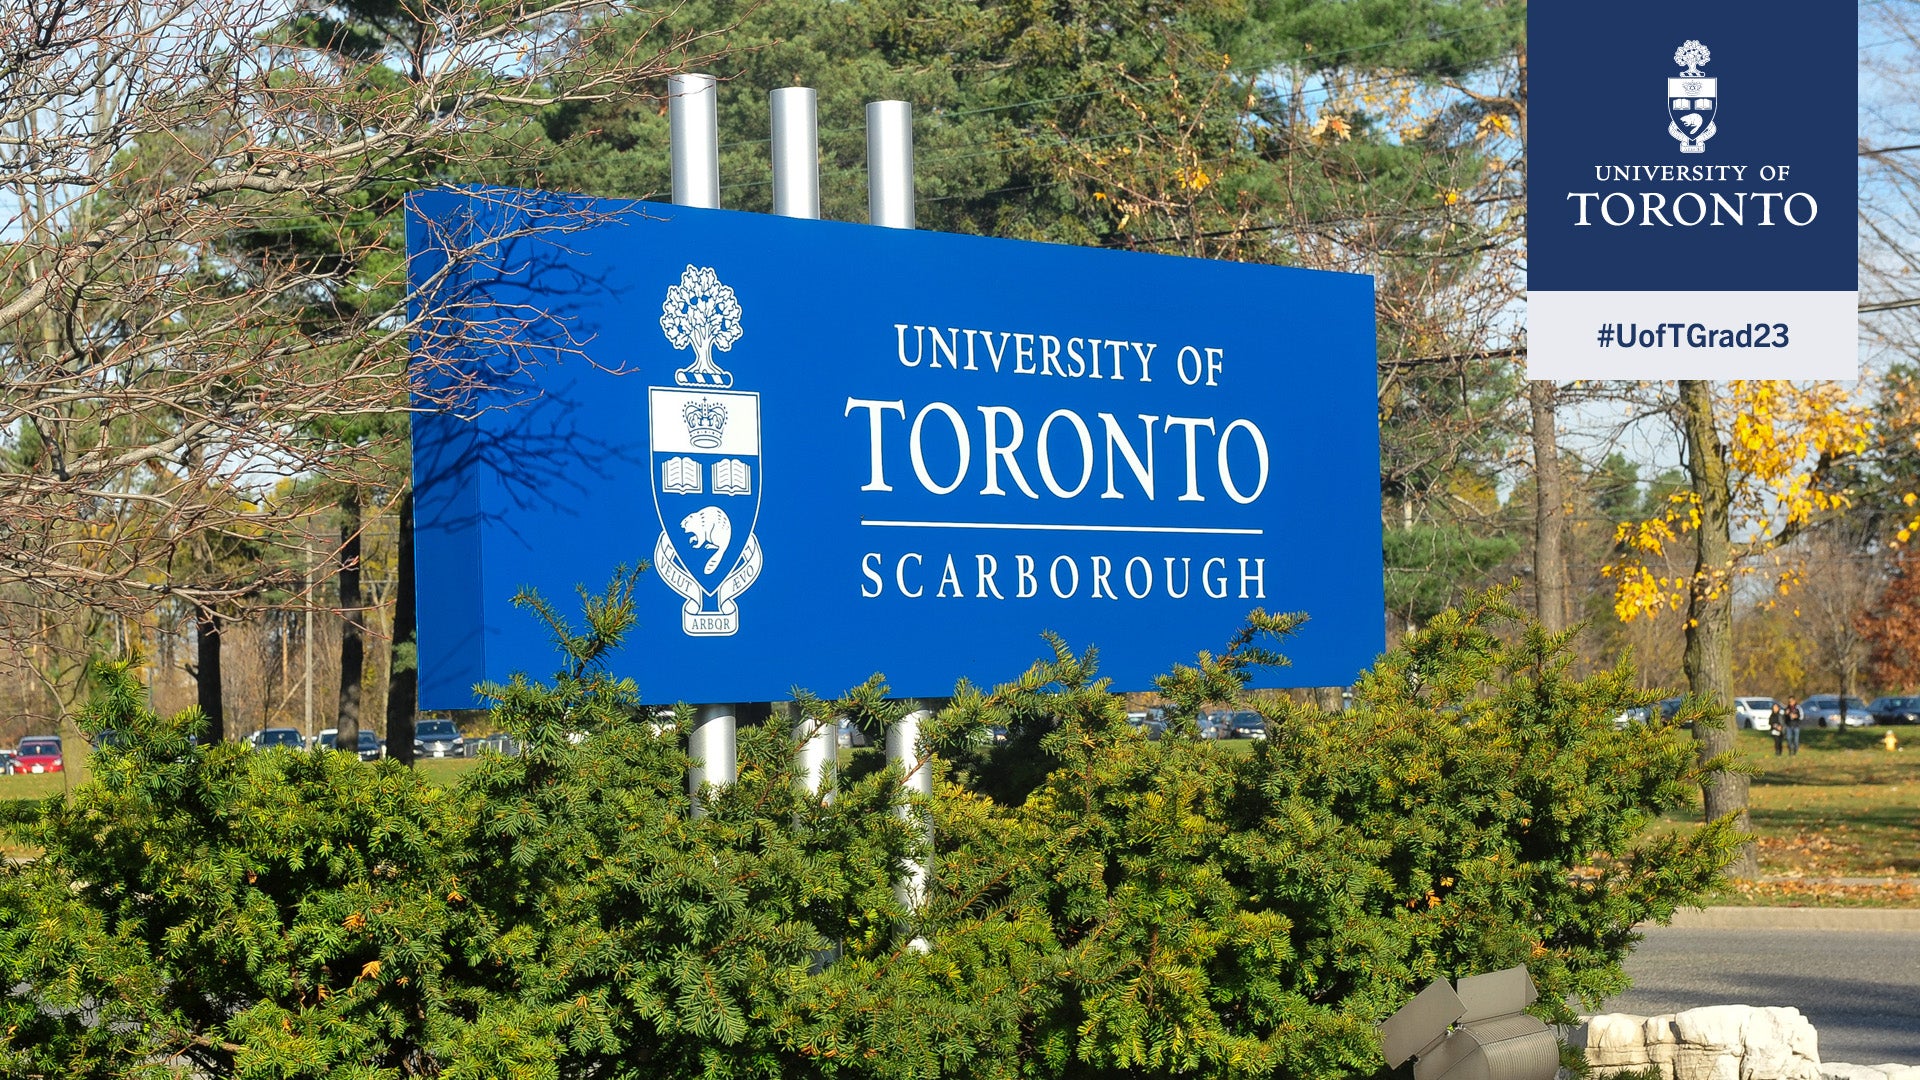 UTSC campus sign, surrounded by fall foliage